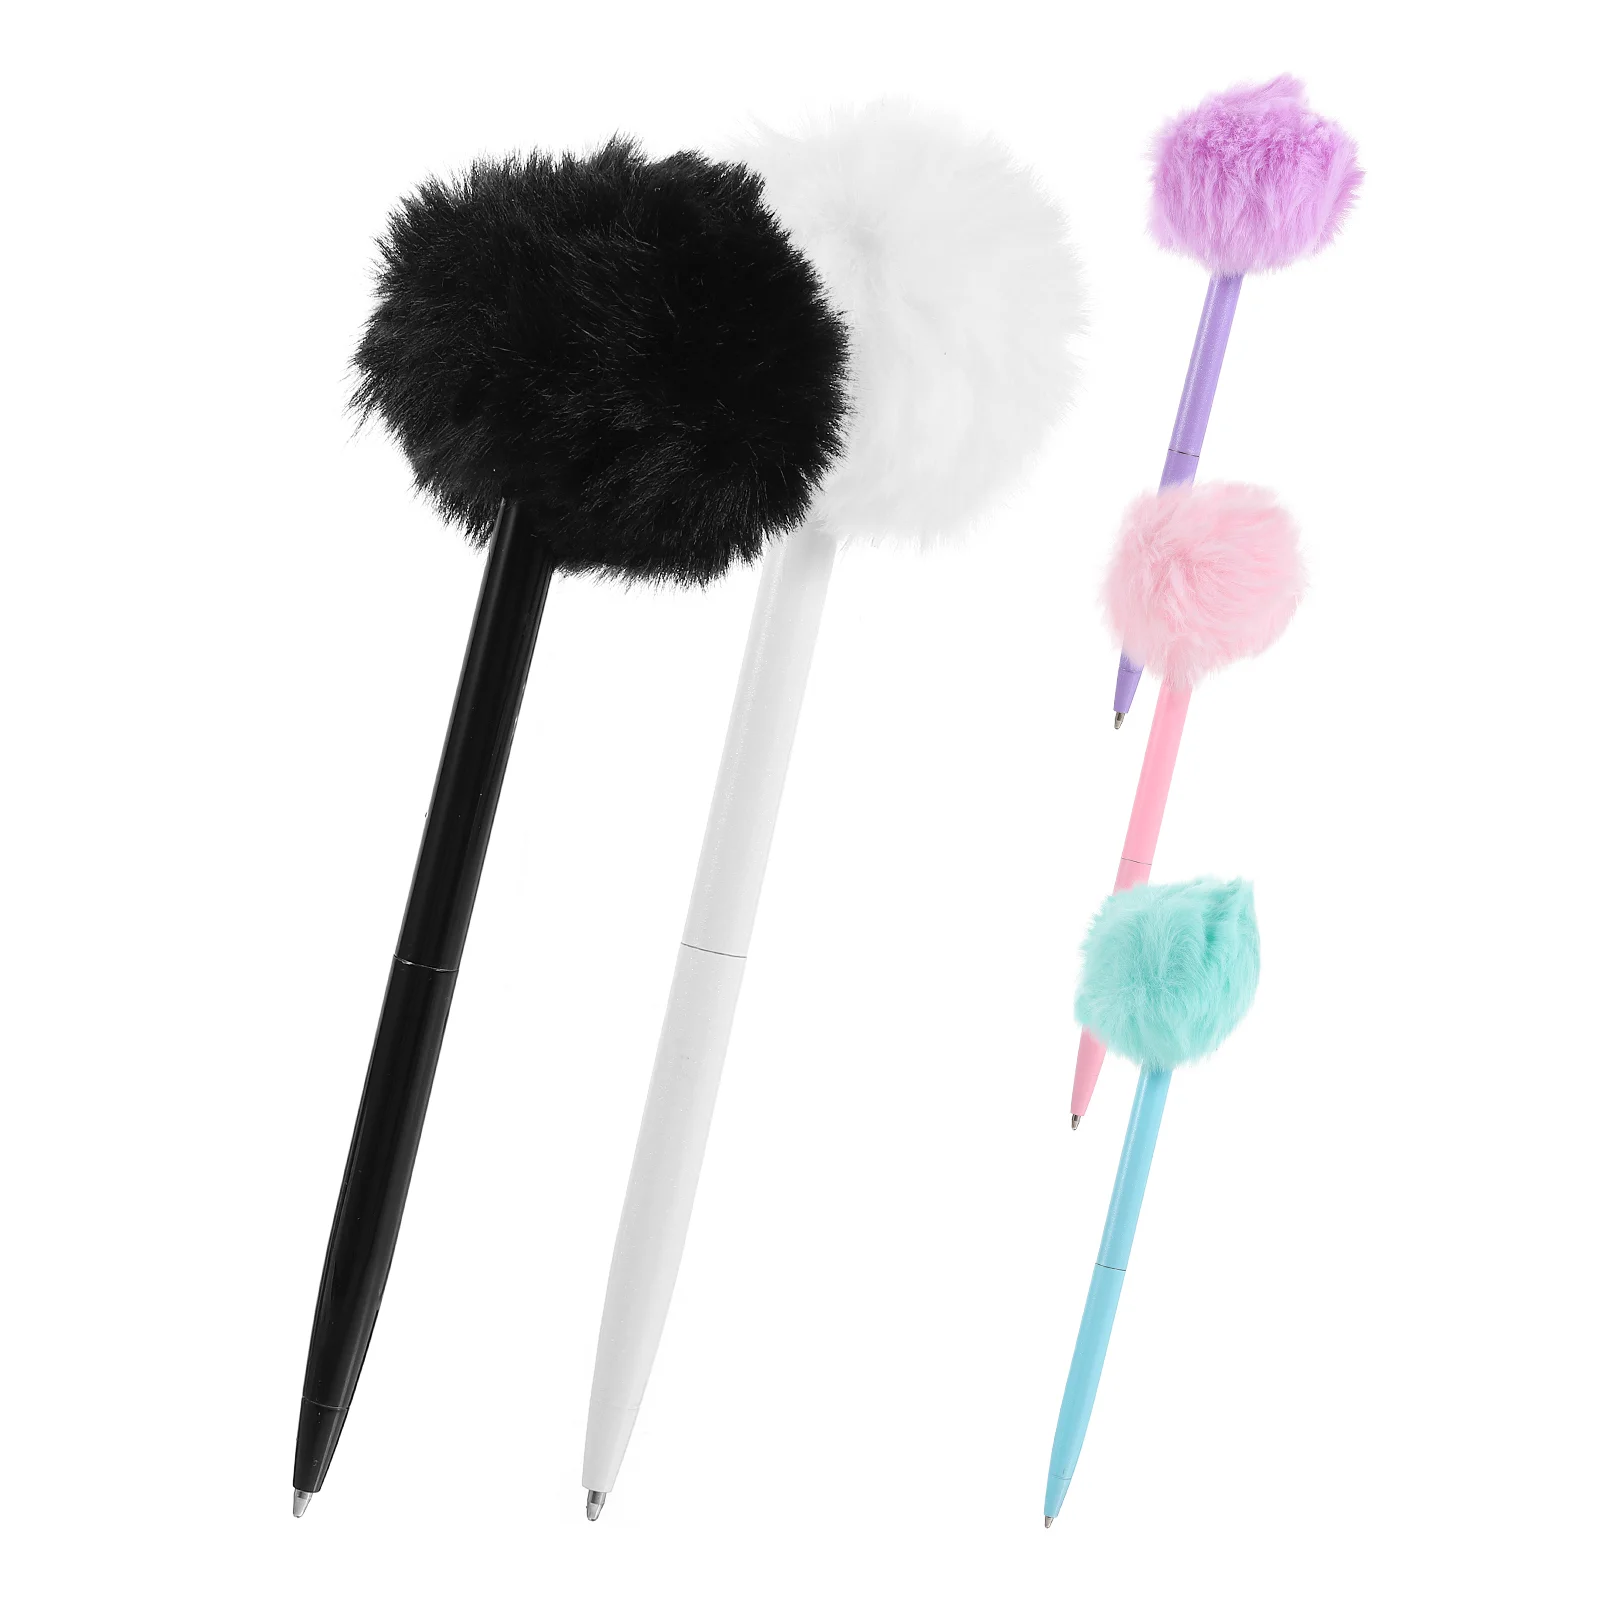 5 Pcs Ball Pen Teachers Fluffy Pens Decorate Coworkers Gifts Student Plush Writing Decorative Point 50 sheets blank writing paper letter decorate stationary letters lovers decorative